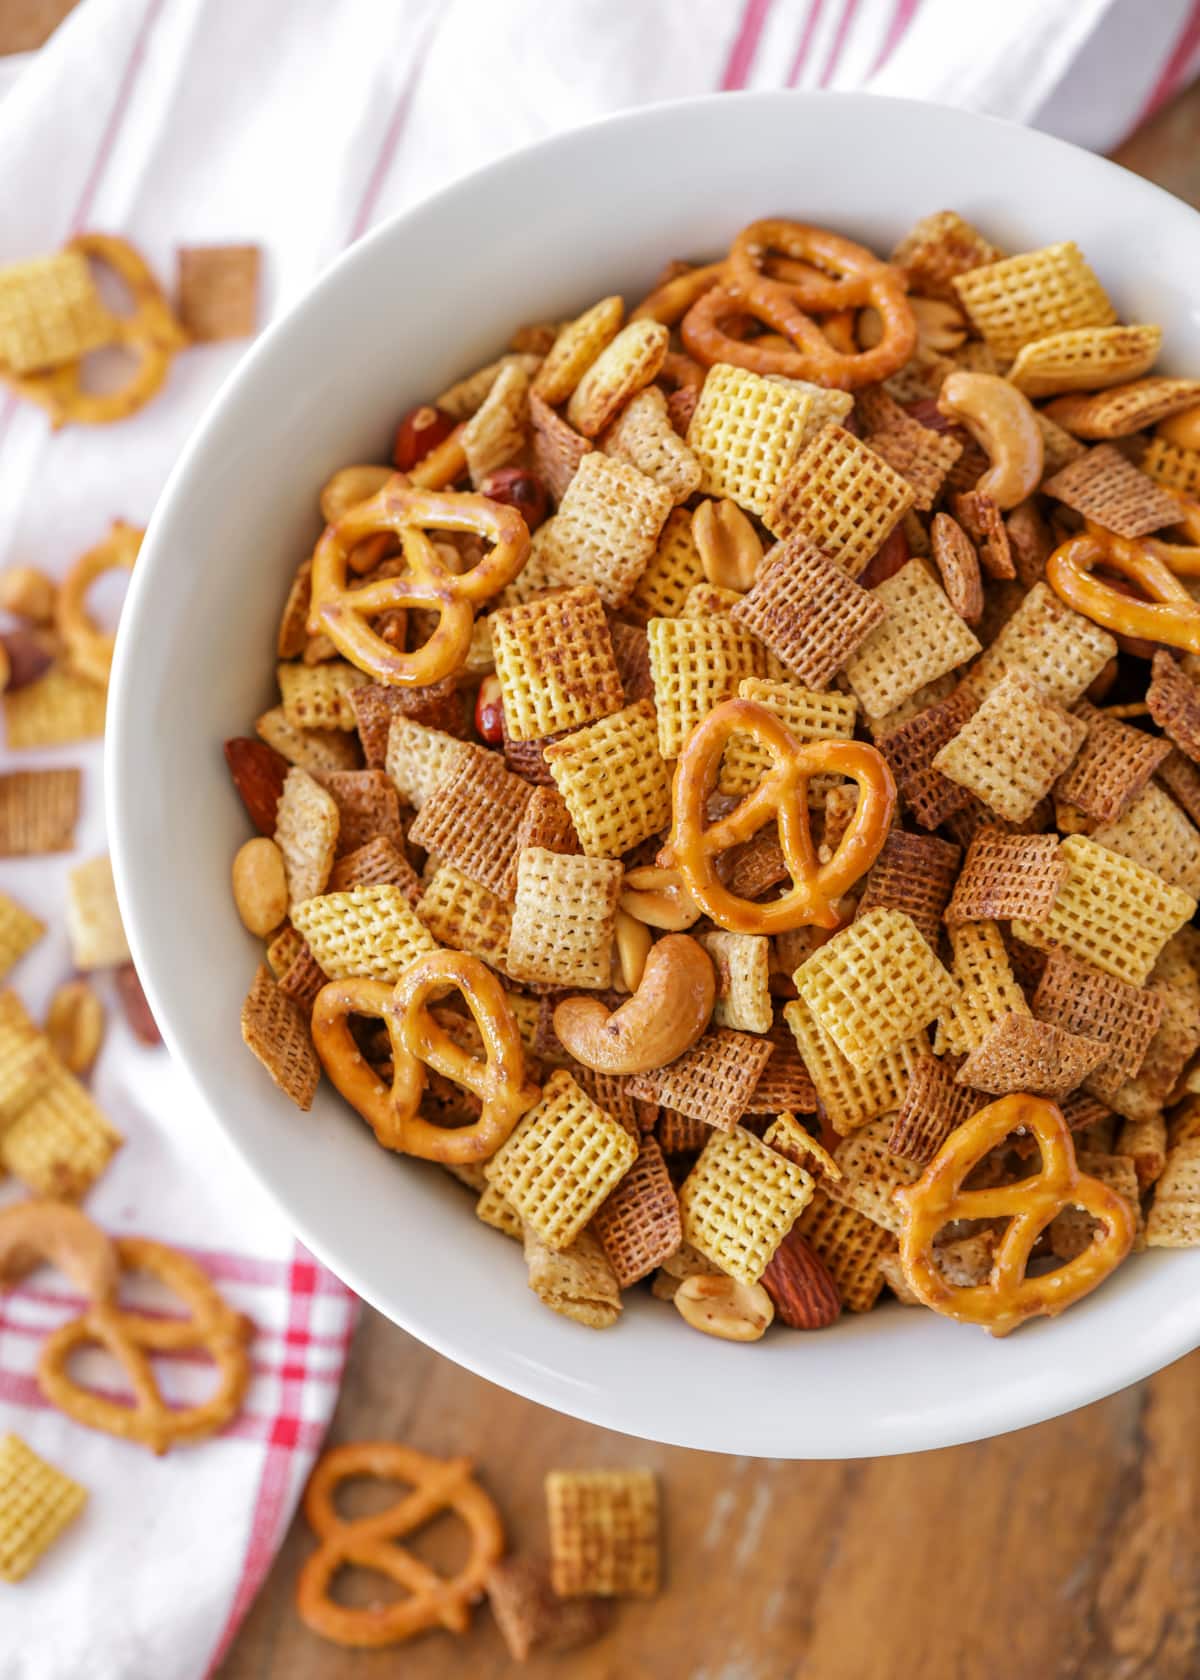 Toasted original chex mix recipe served in a white bowl.